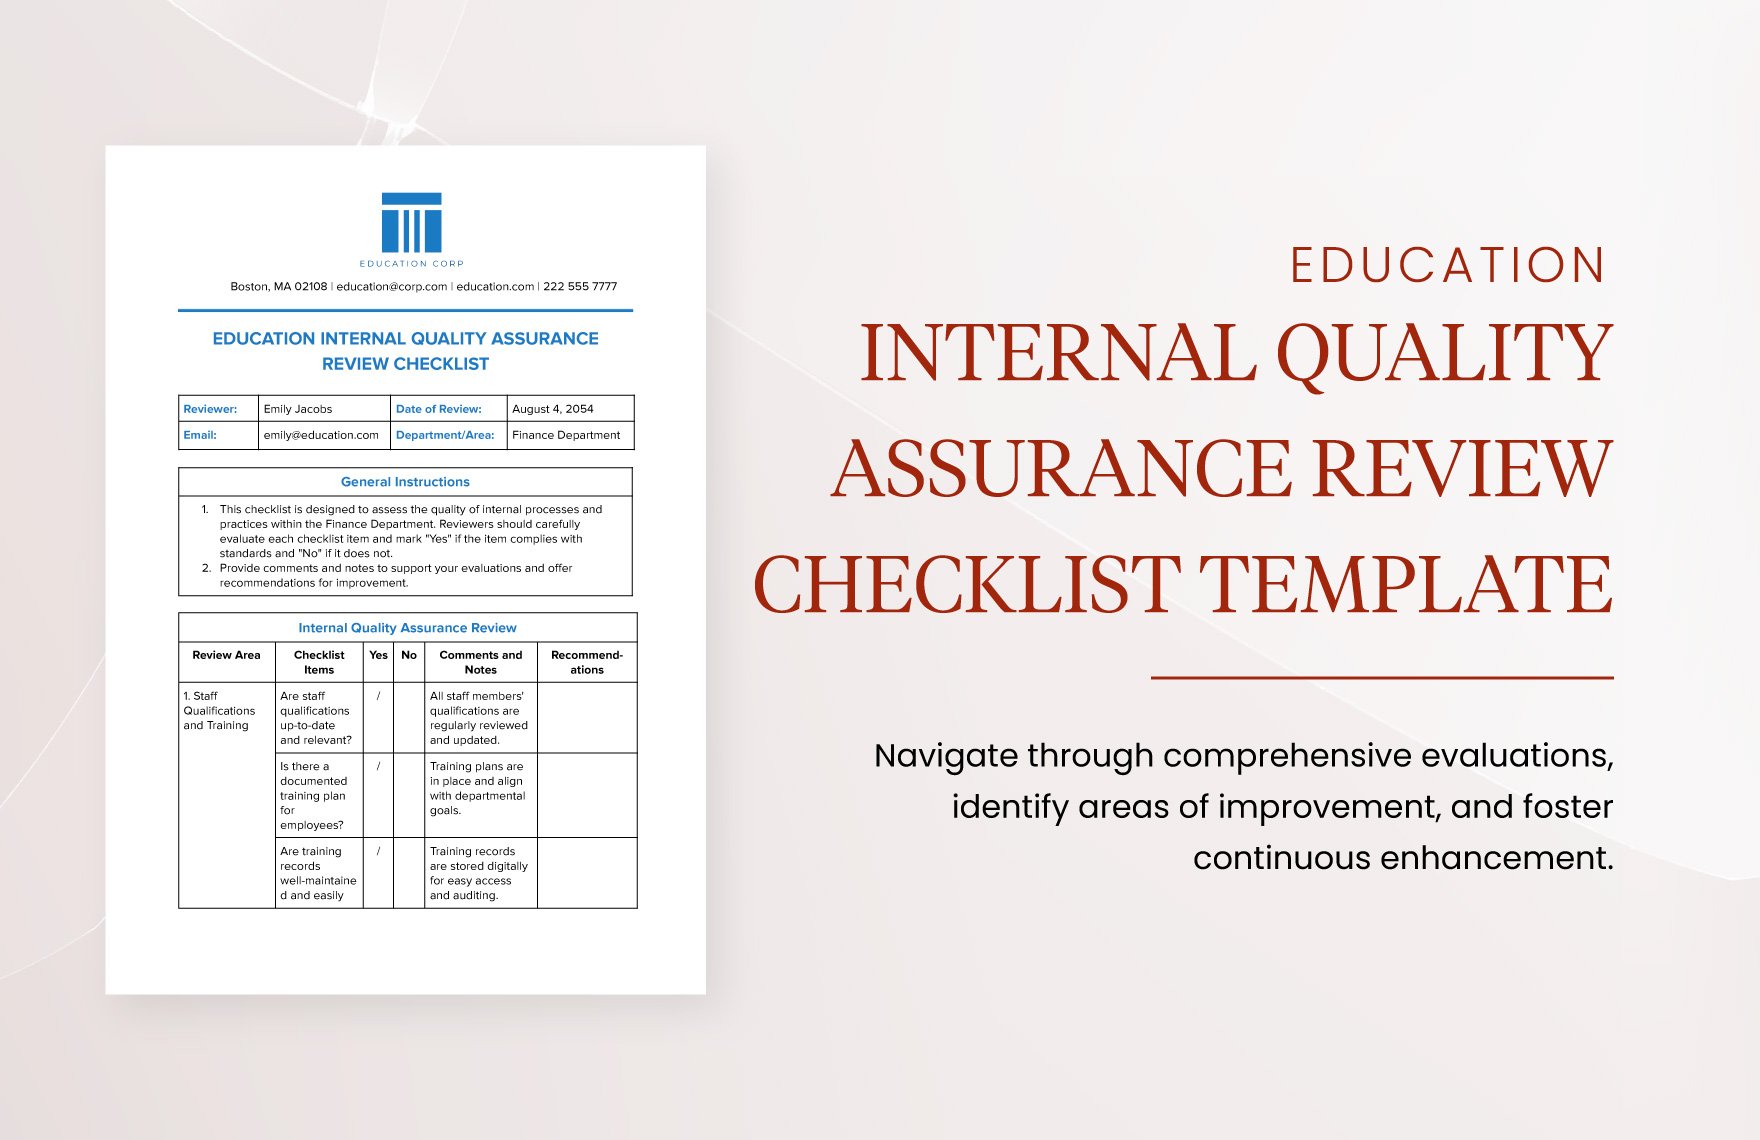 Education Internal Quality Assurance Review Checklist Template